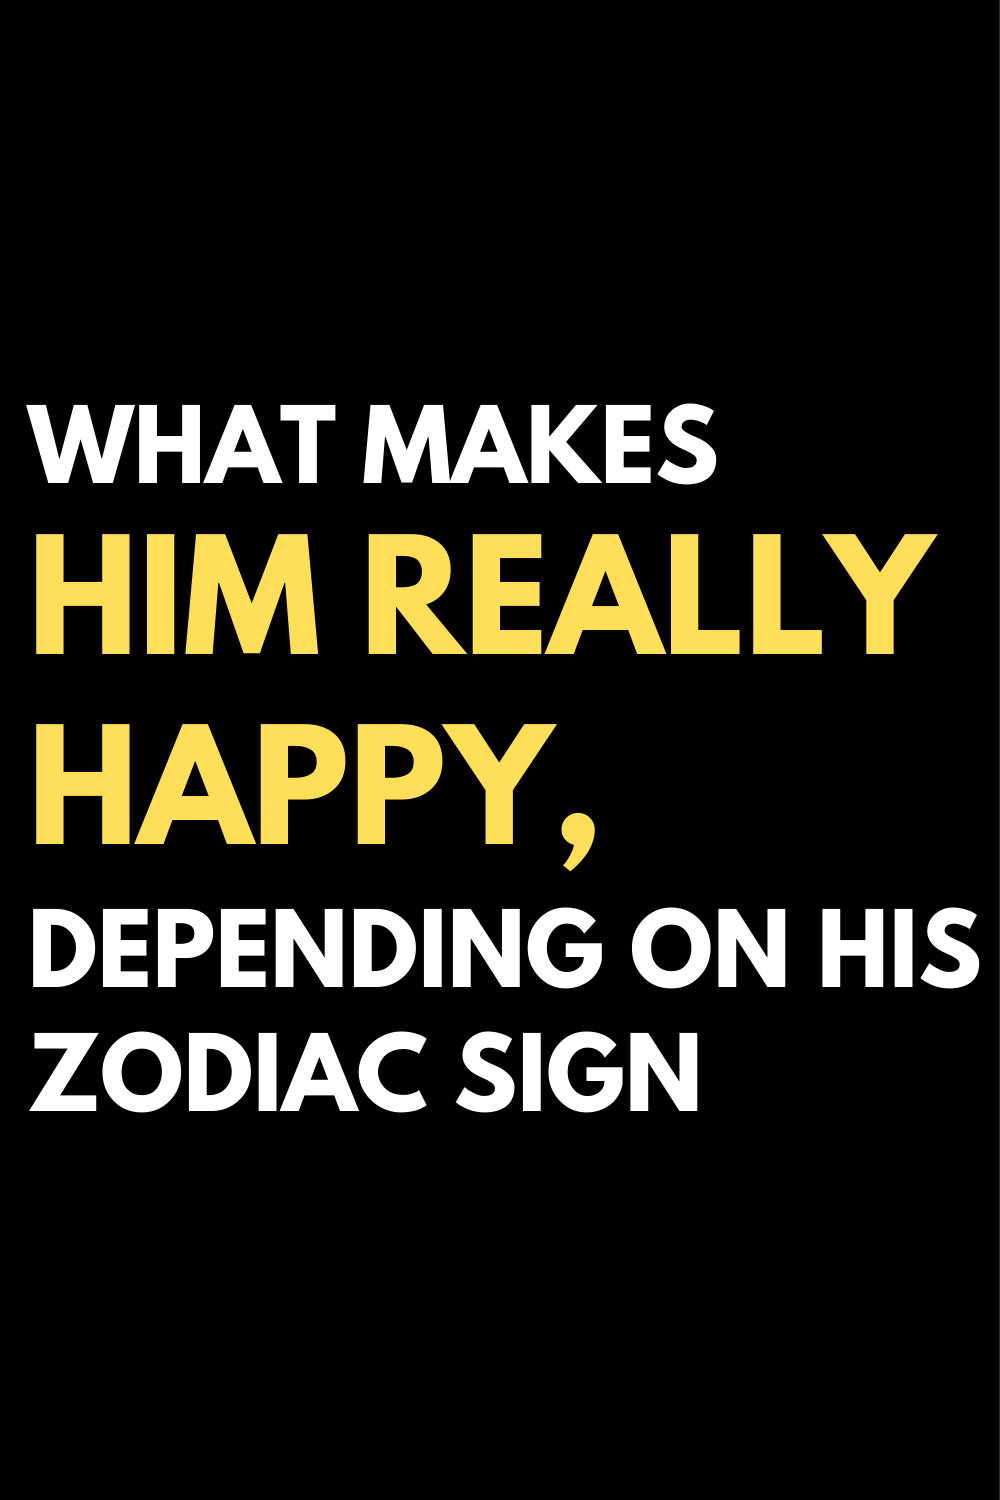 What makes him really happy, depending on his zodiac sign